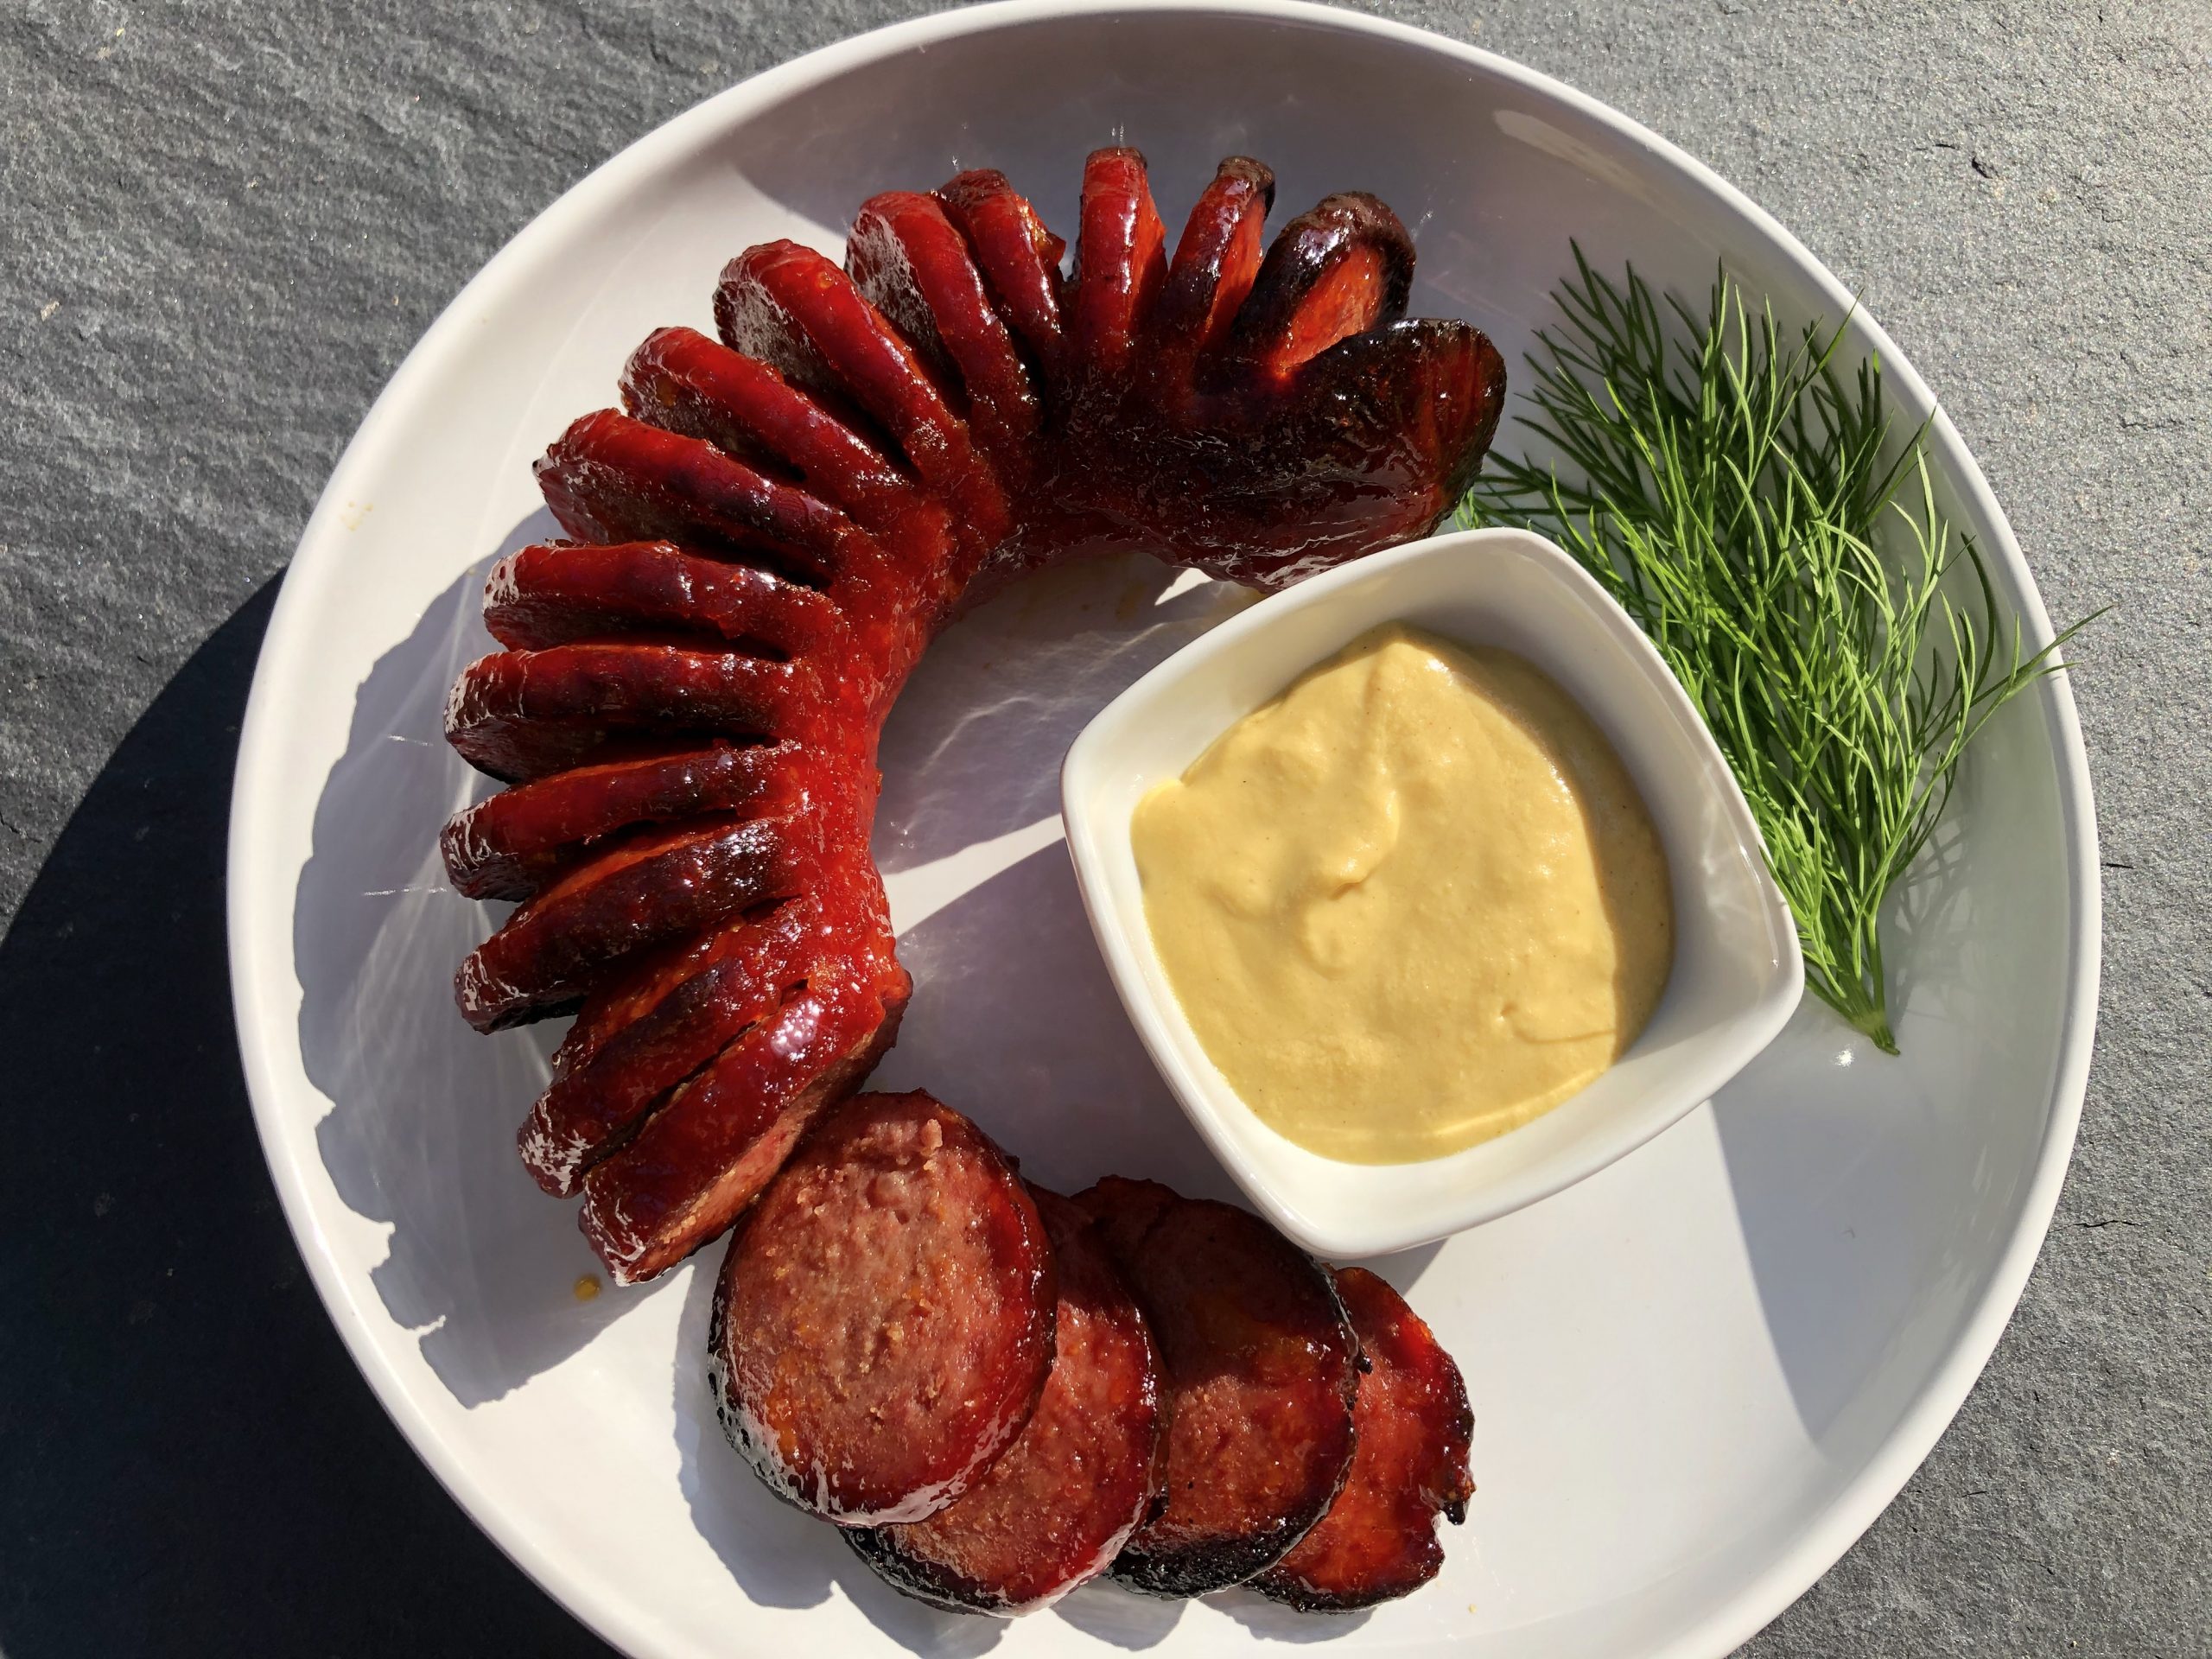 Candied Baked Salami – Hasselback Style (Gluten Free)